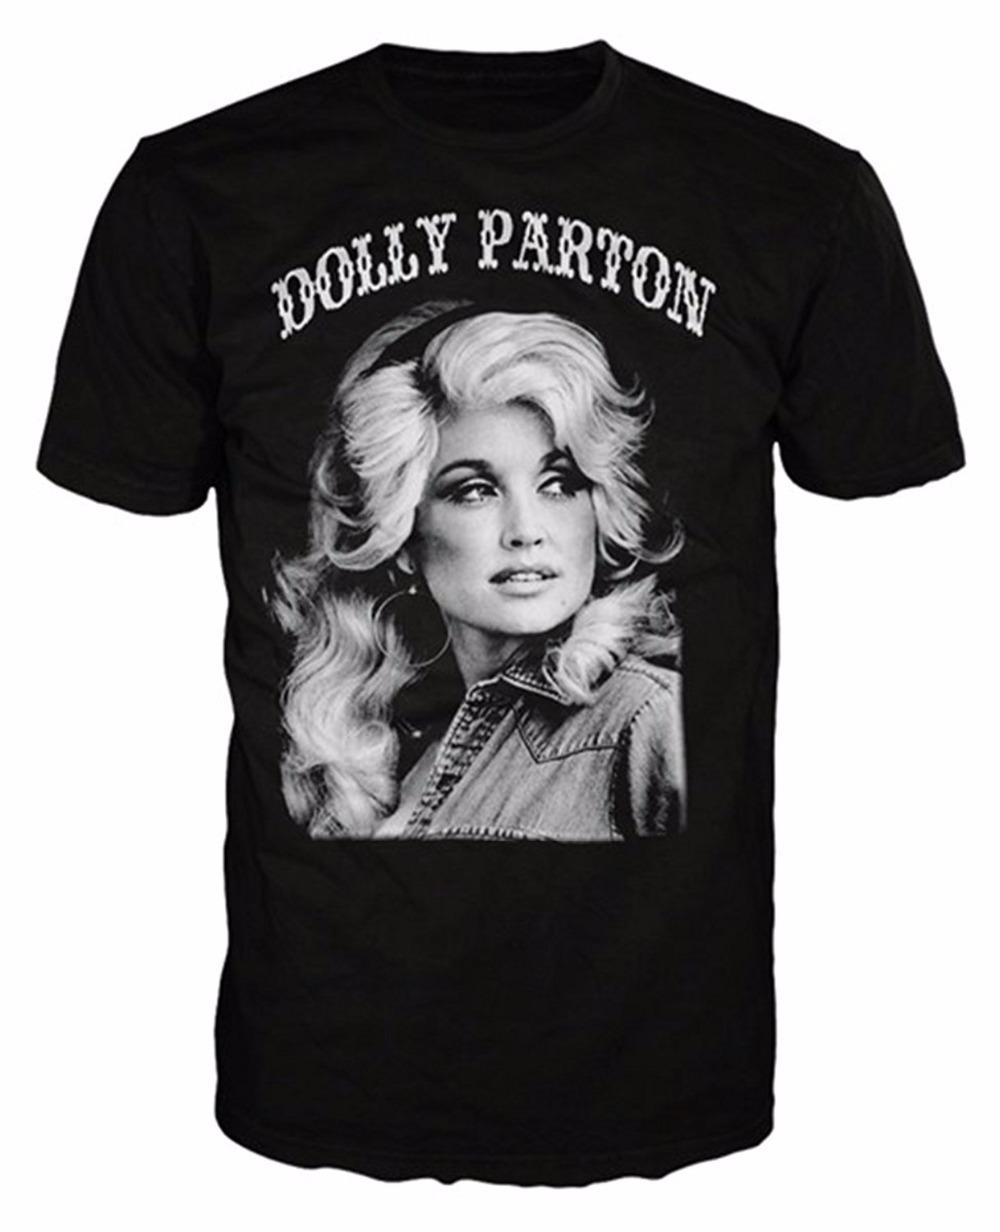 Cool SS Logo - Cool T Shirts Wholesale Crew Neck Short Sleeve Dolly Parton B&W